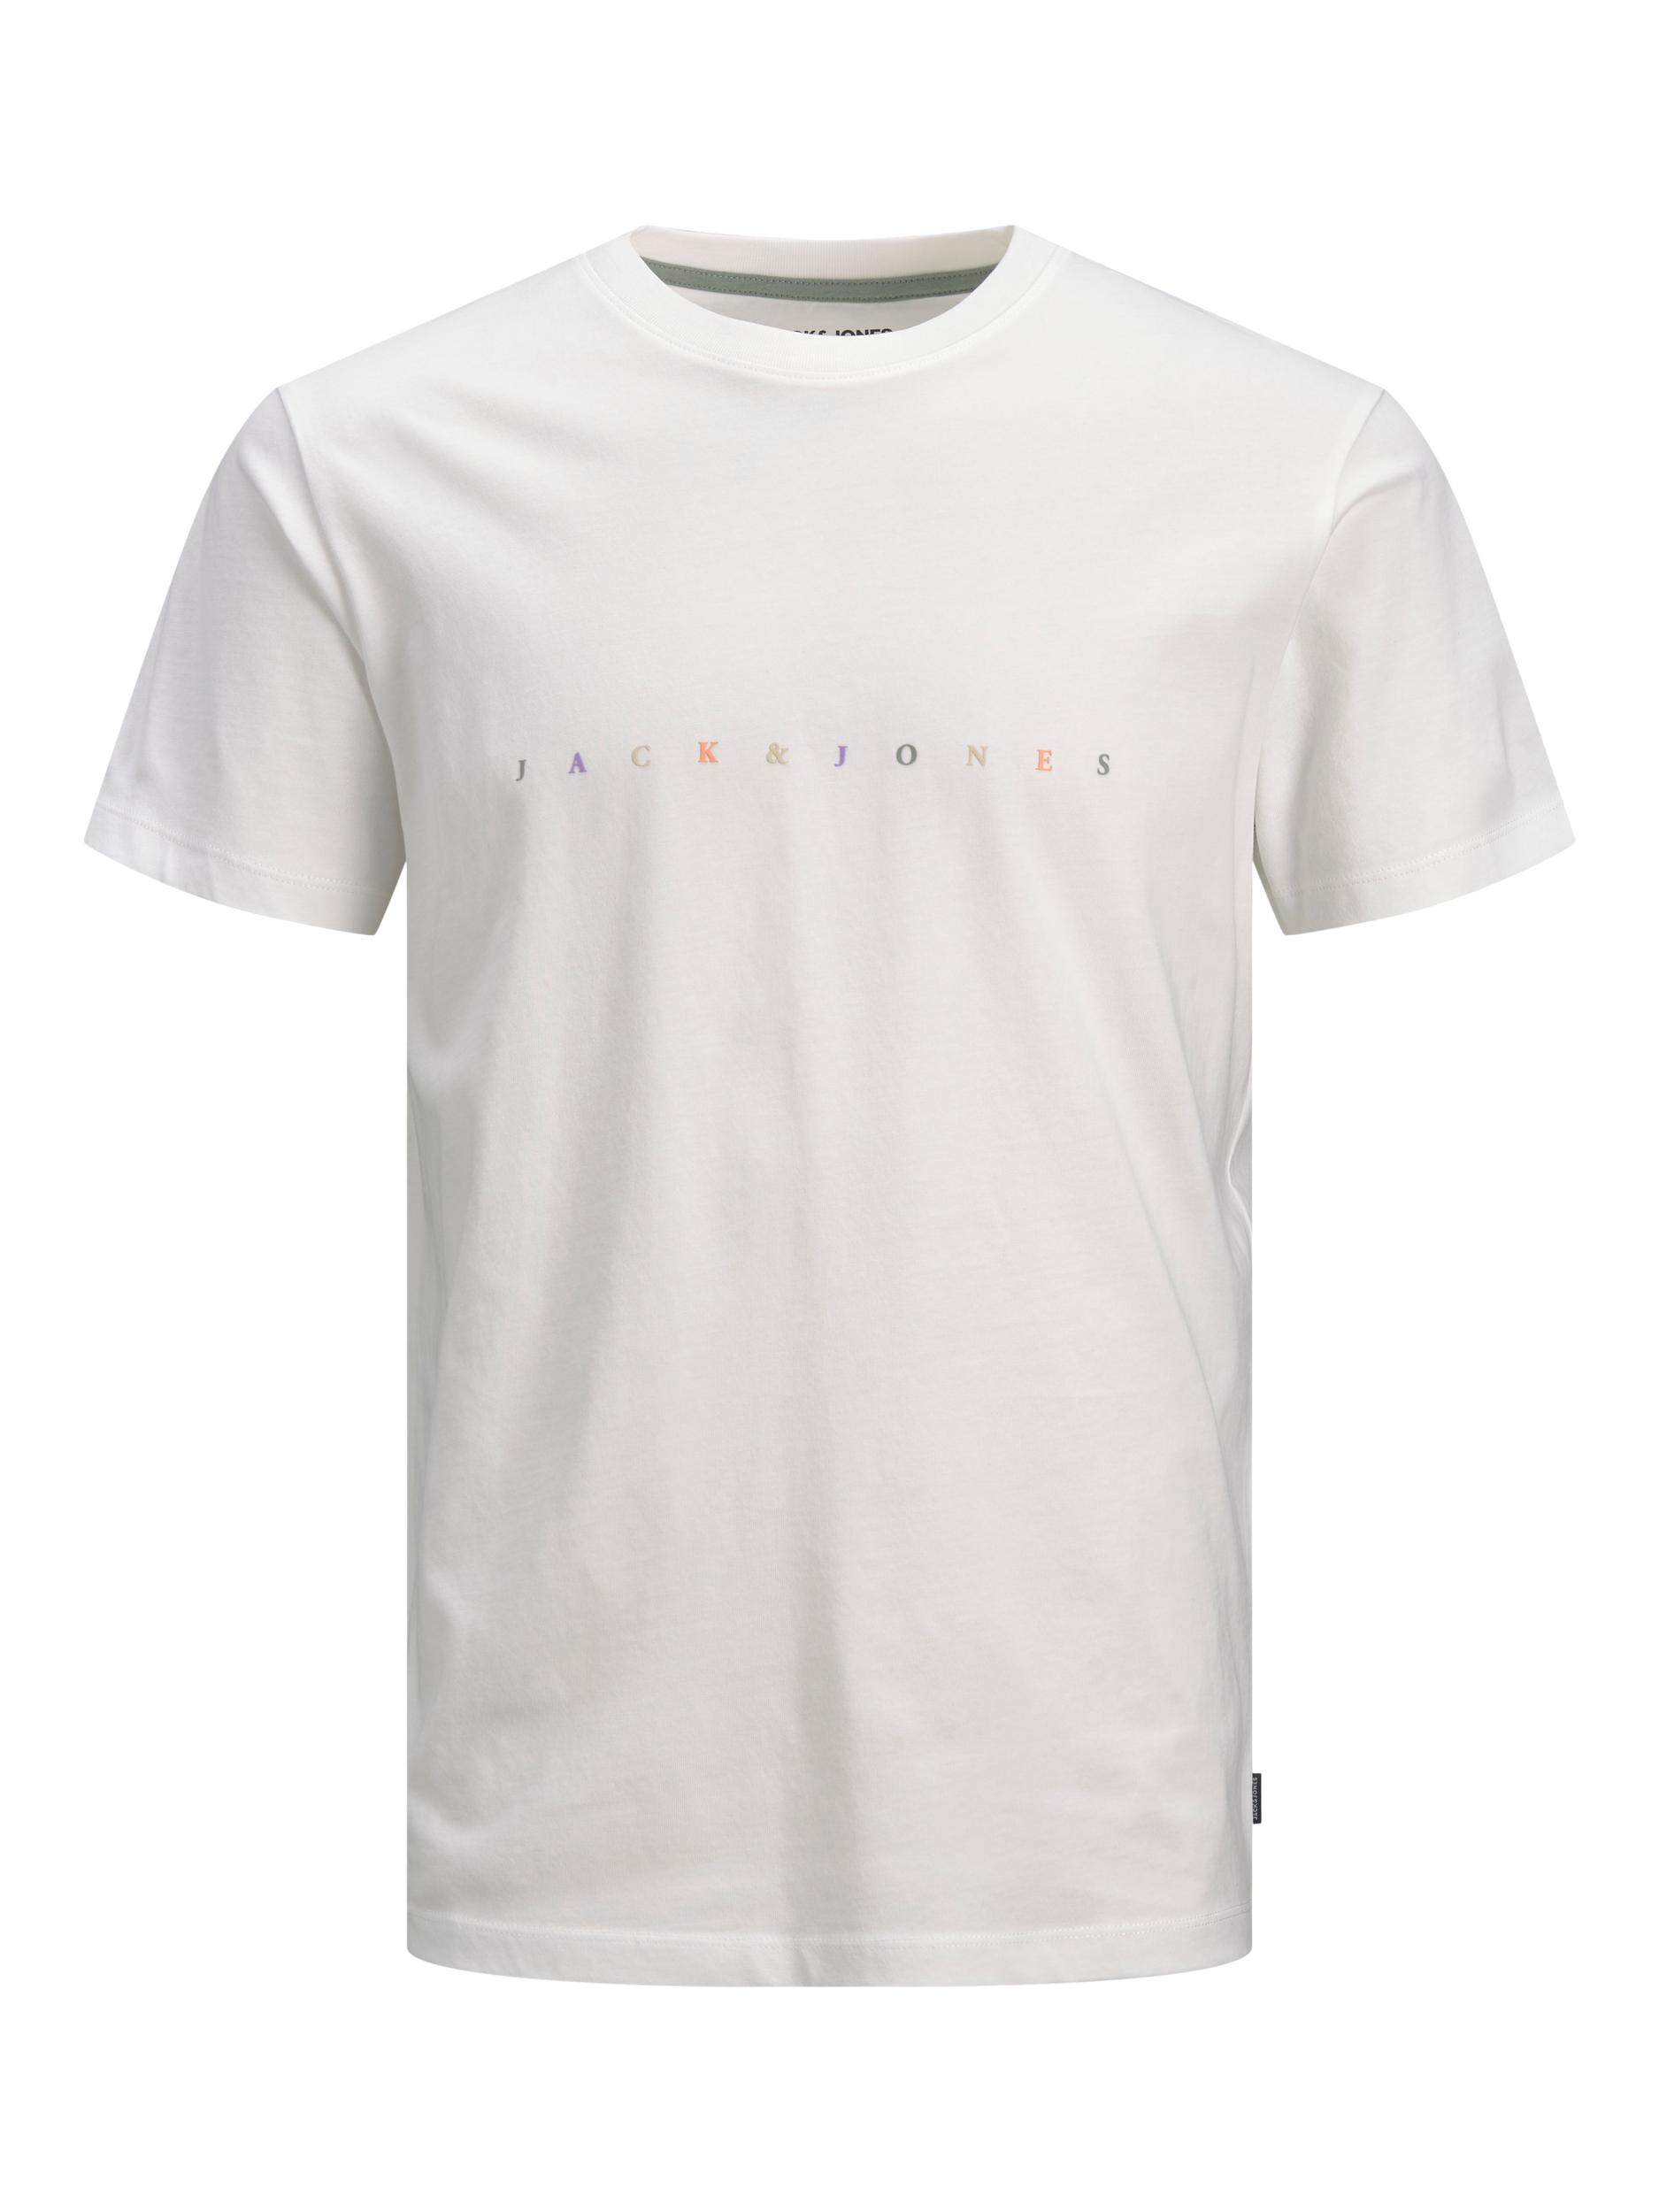 T-Shirt, Off White, large image number 0